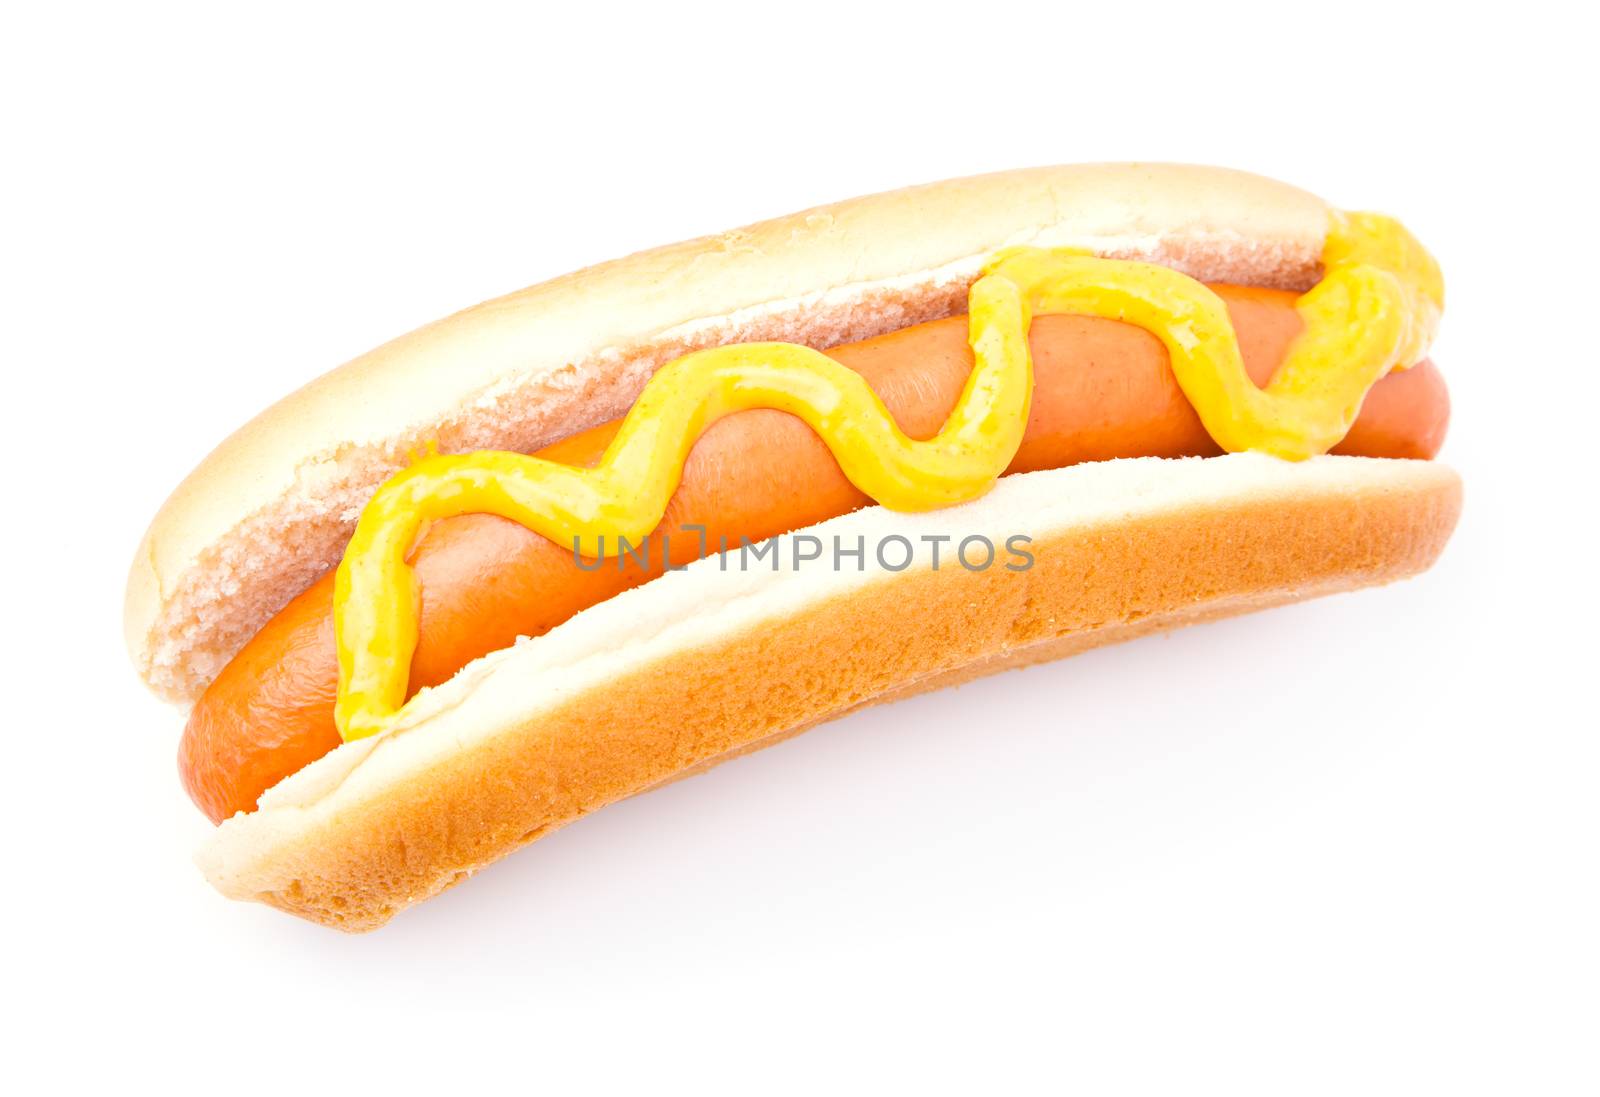 Hot dog with vegetables on a white background